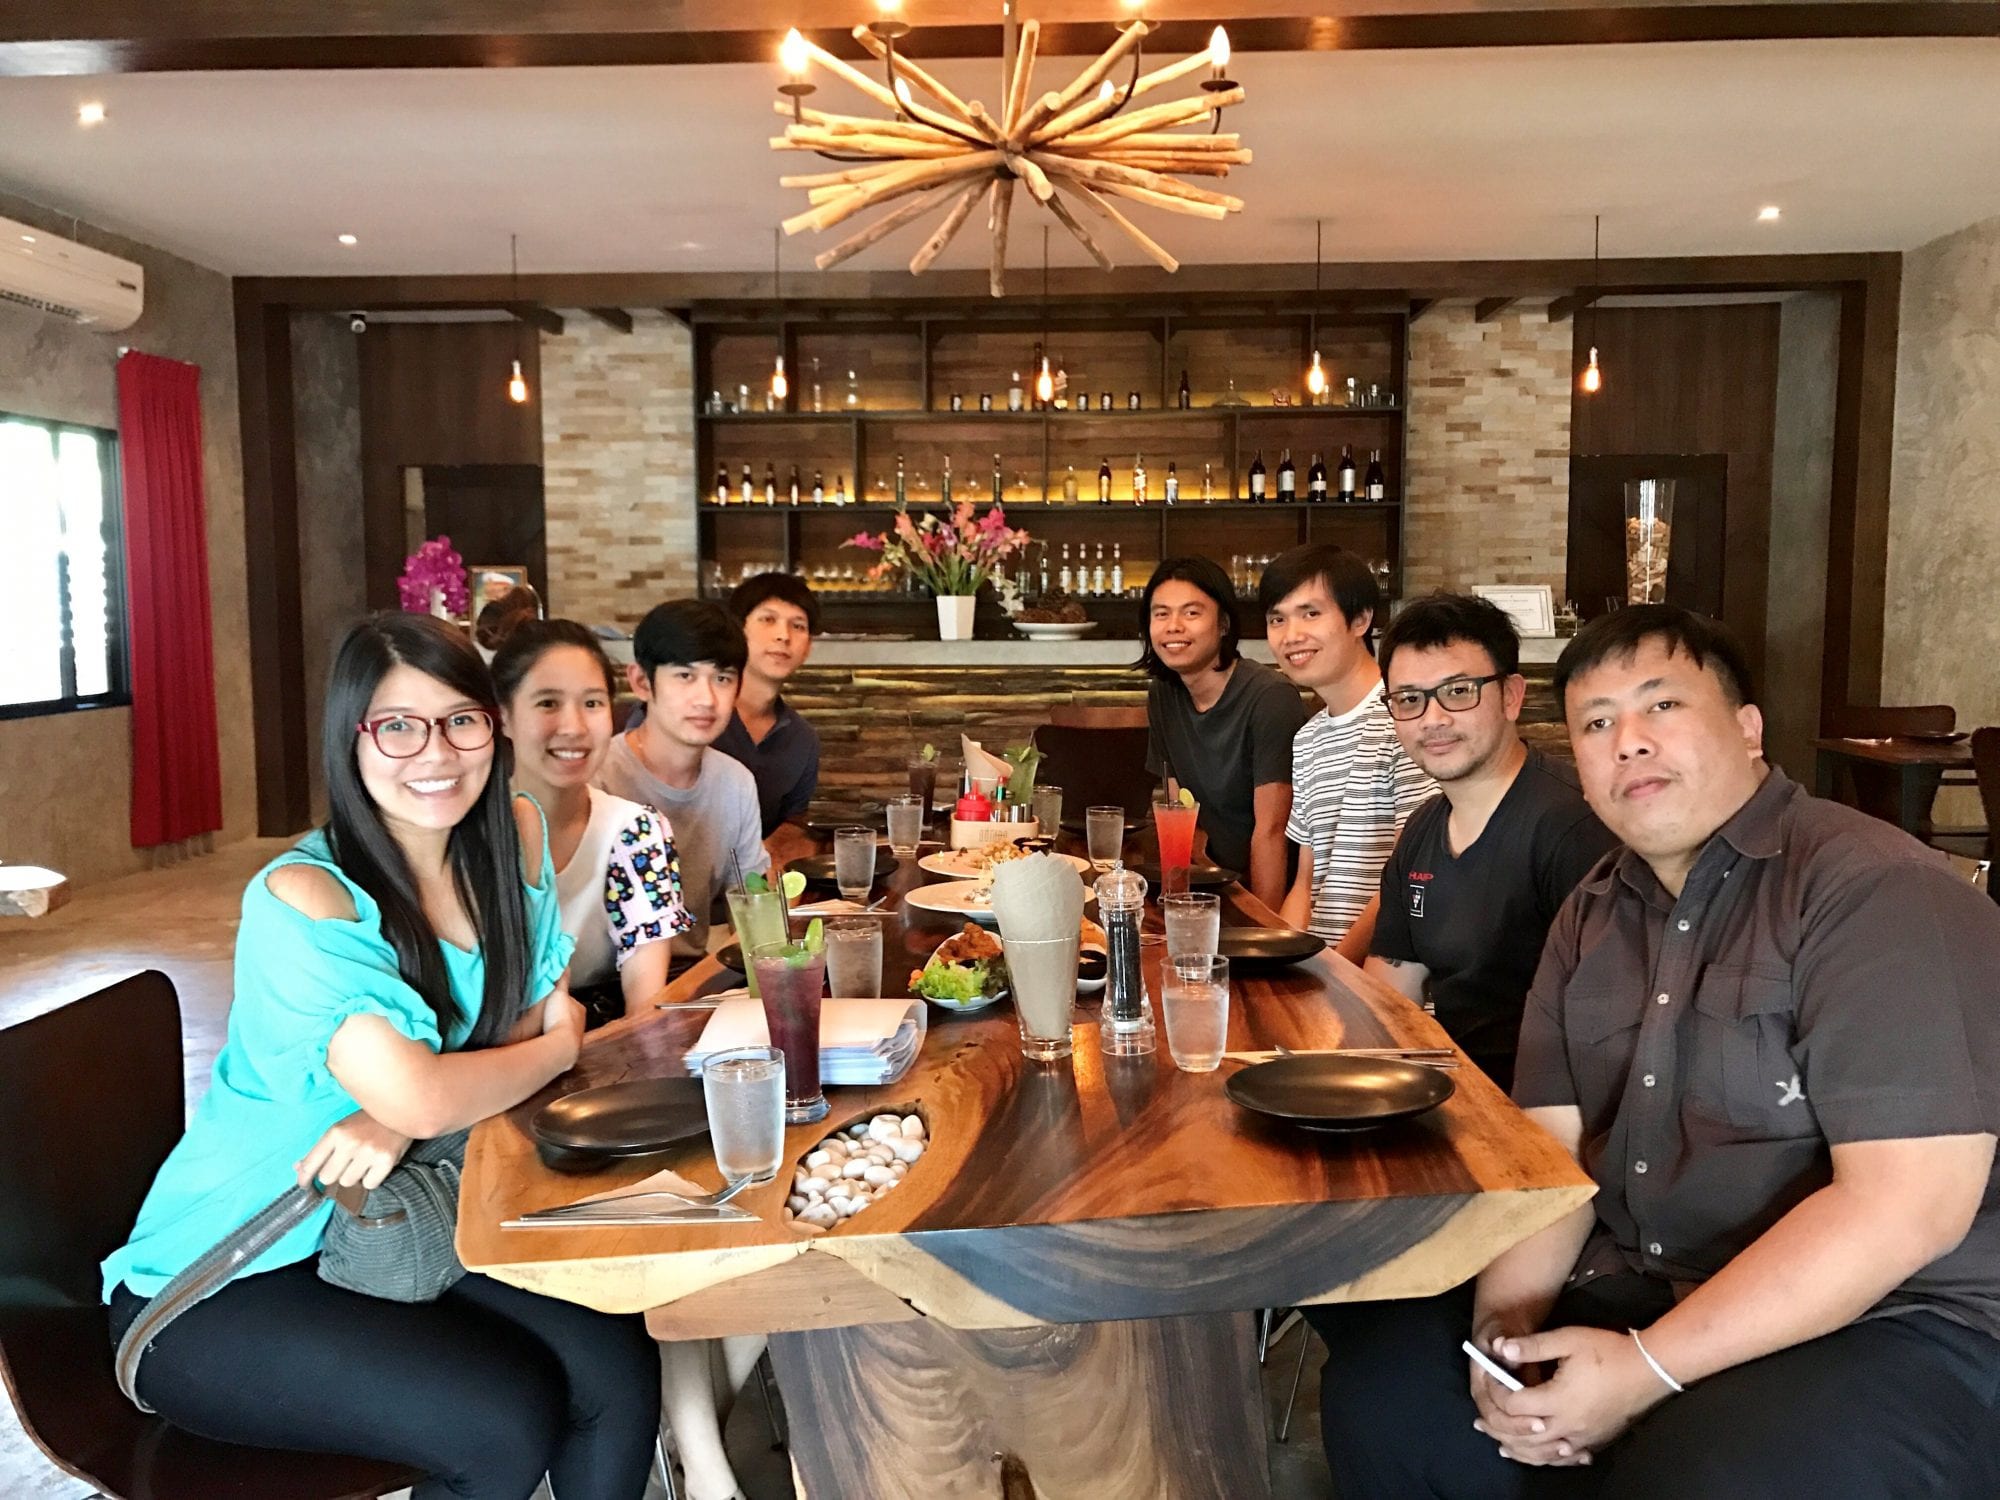 PCMI's Thailand Team Continues to Grow